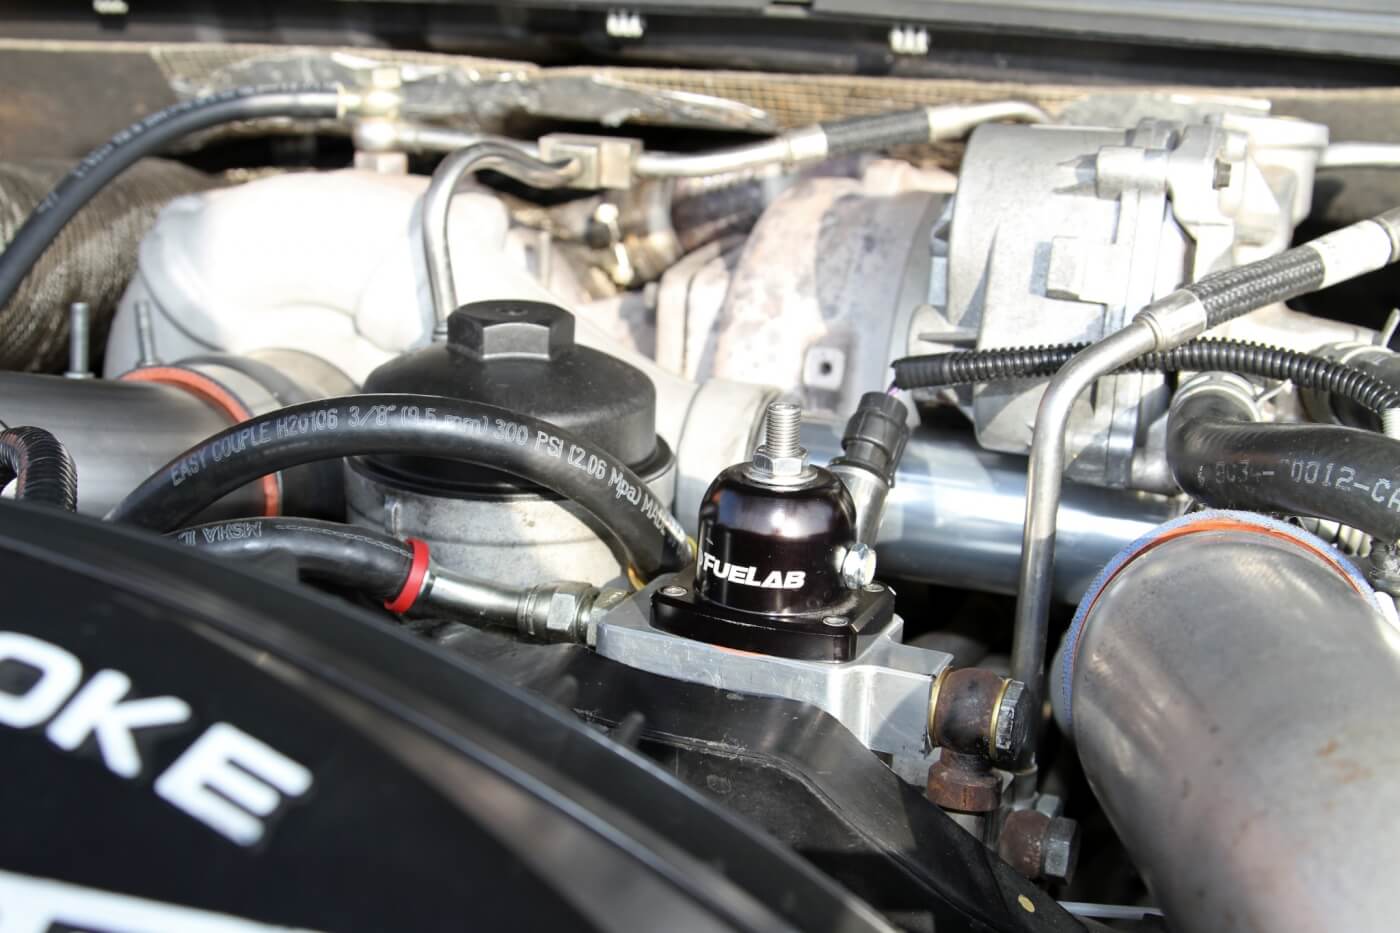 A FueLab regulator is the heart of the Side Action Diesel Performance fuel bowl delete for the 6.4L Power Stroke engine. Dual K16 pumps are used to supply fuel to the 100-percent-over SADP injectors.